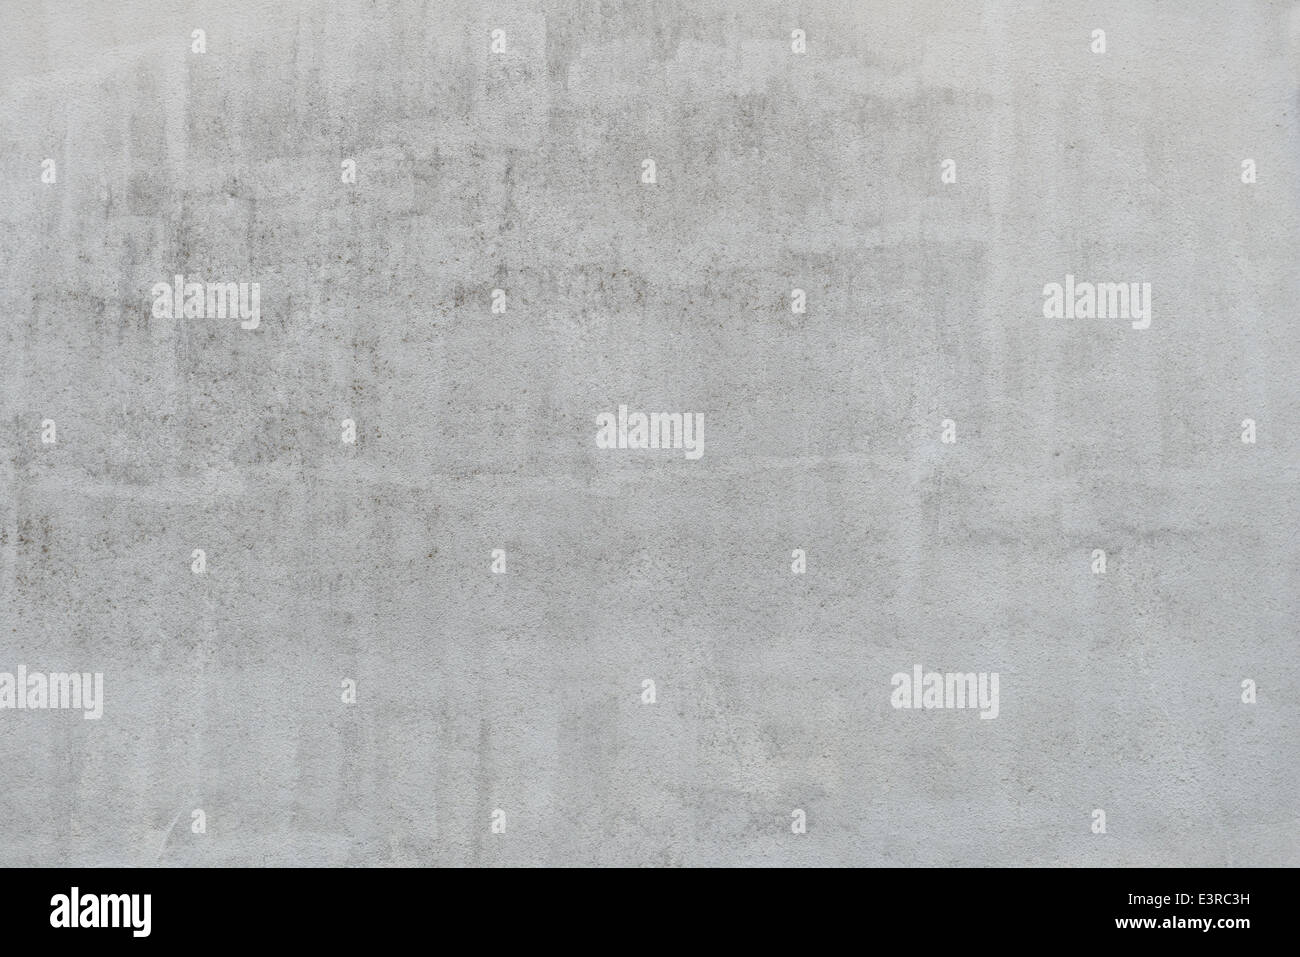 Light gray stucco wall grungy texture background Stock Photo